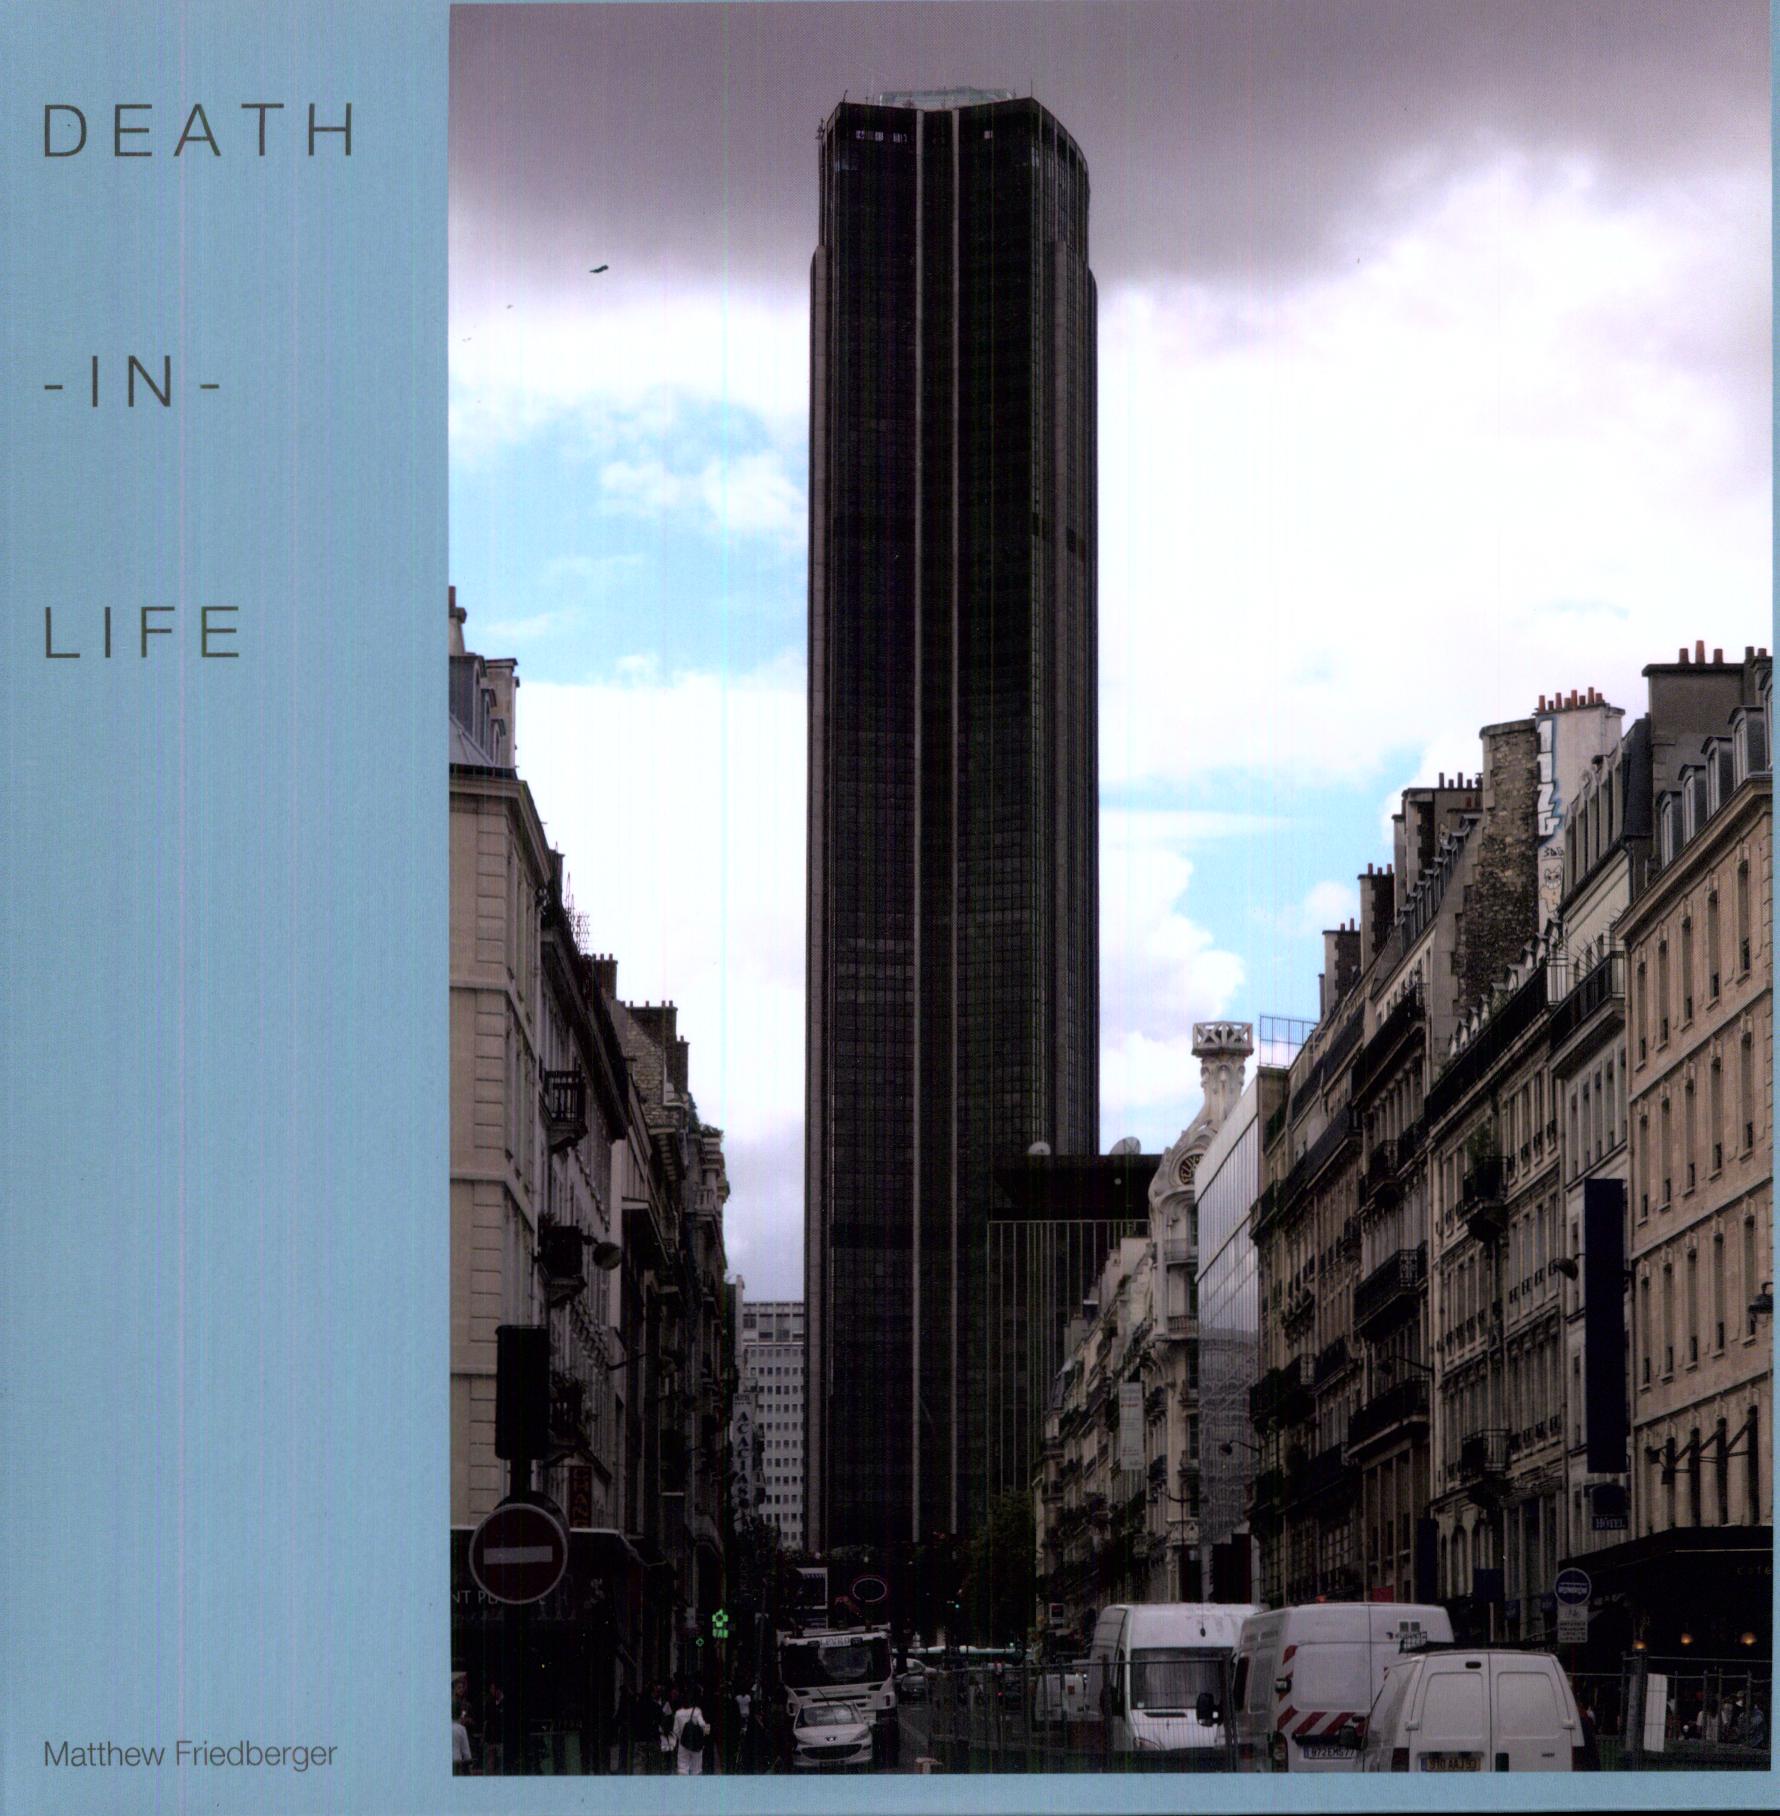 DEATH-IN-LIFE